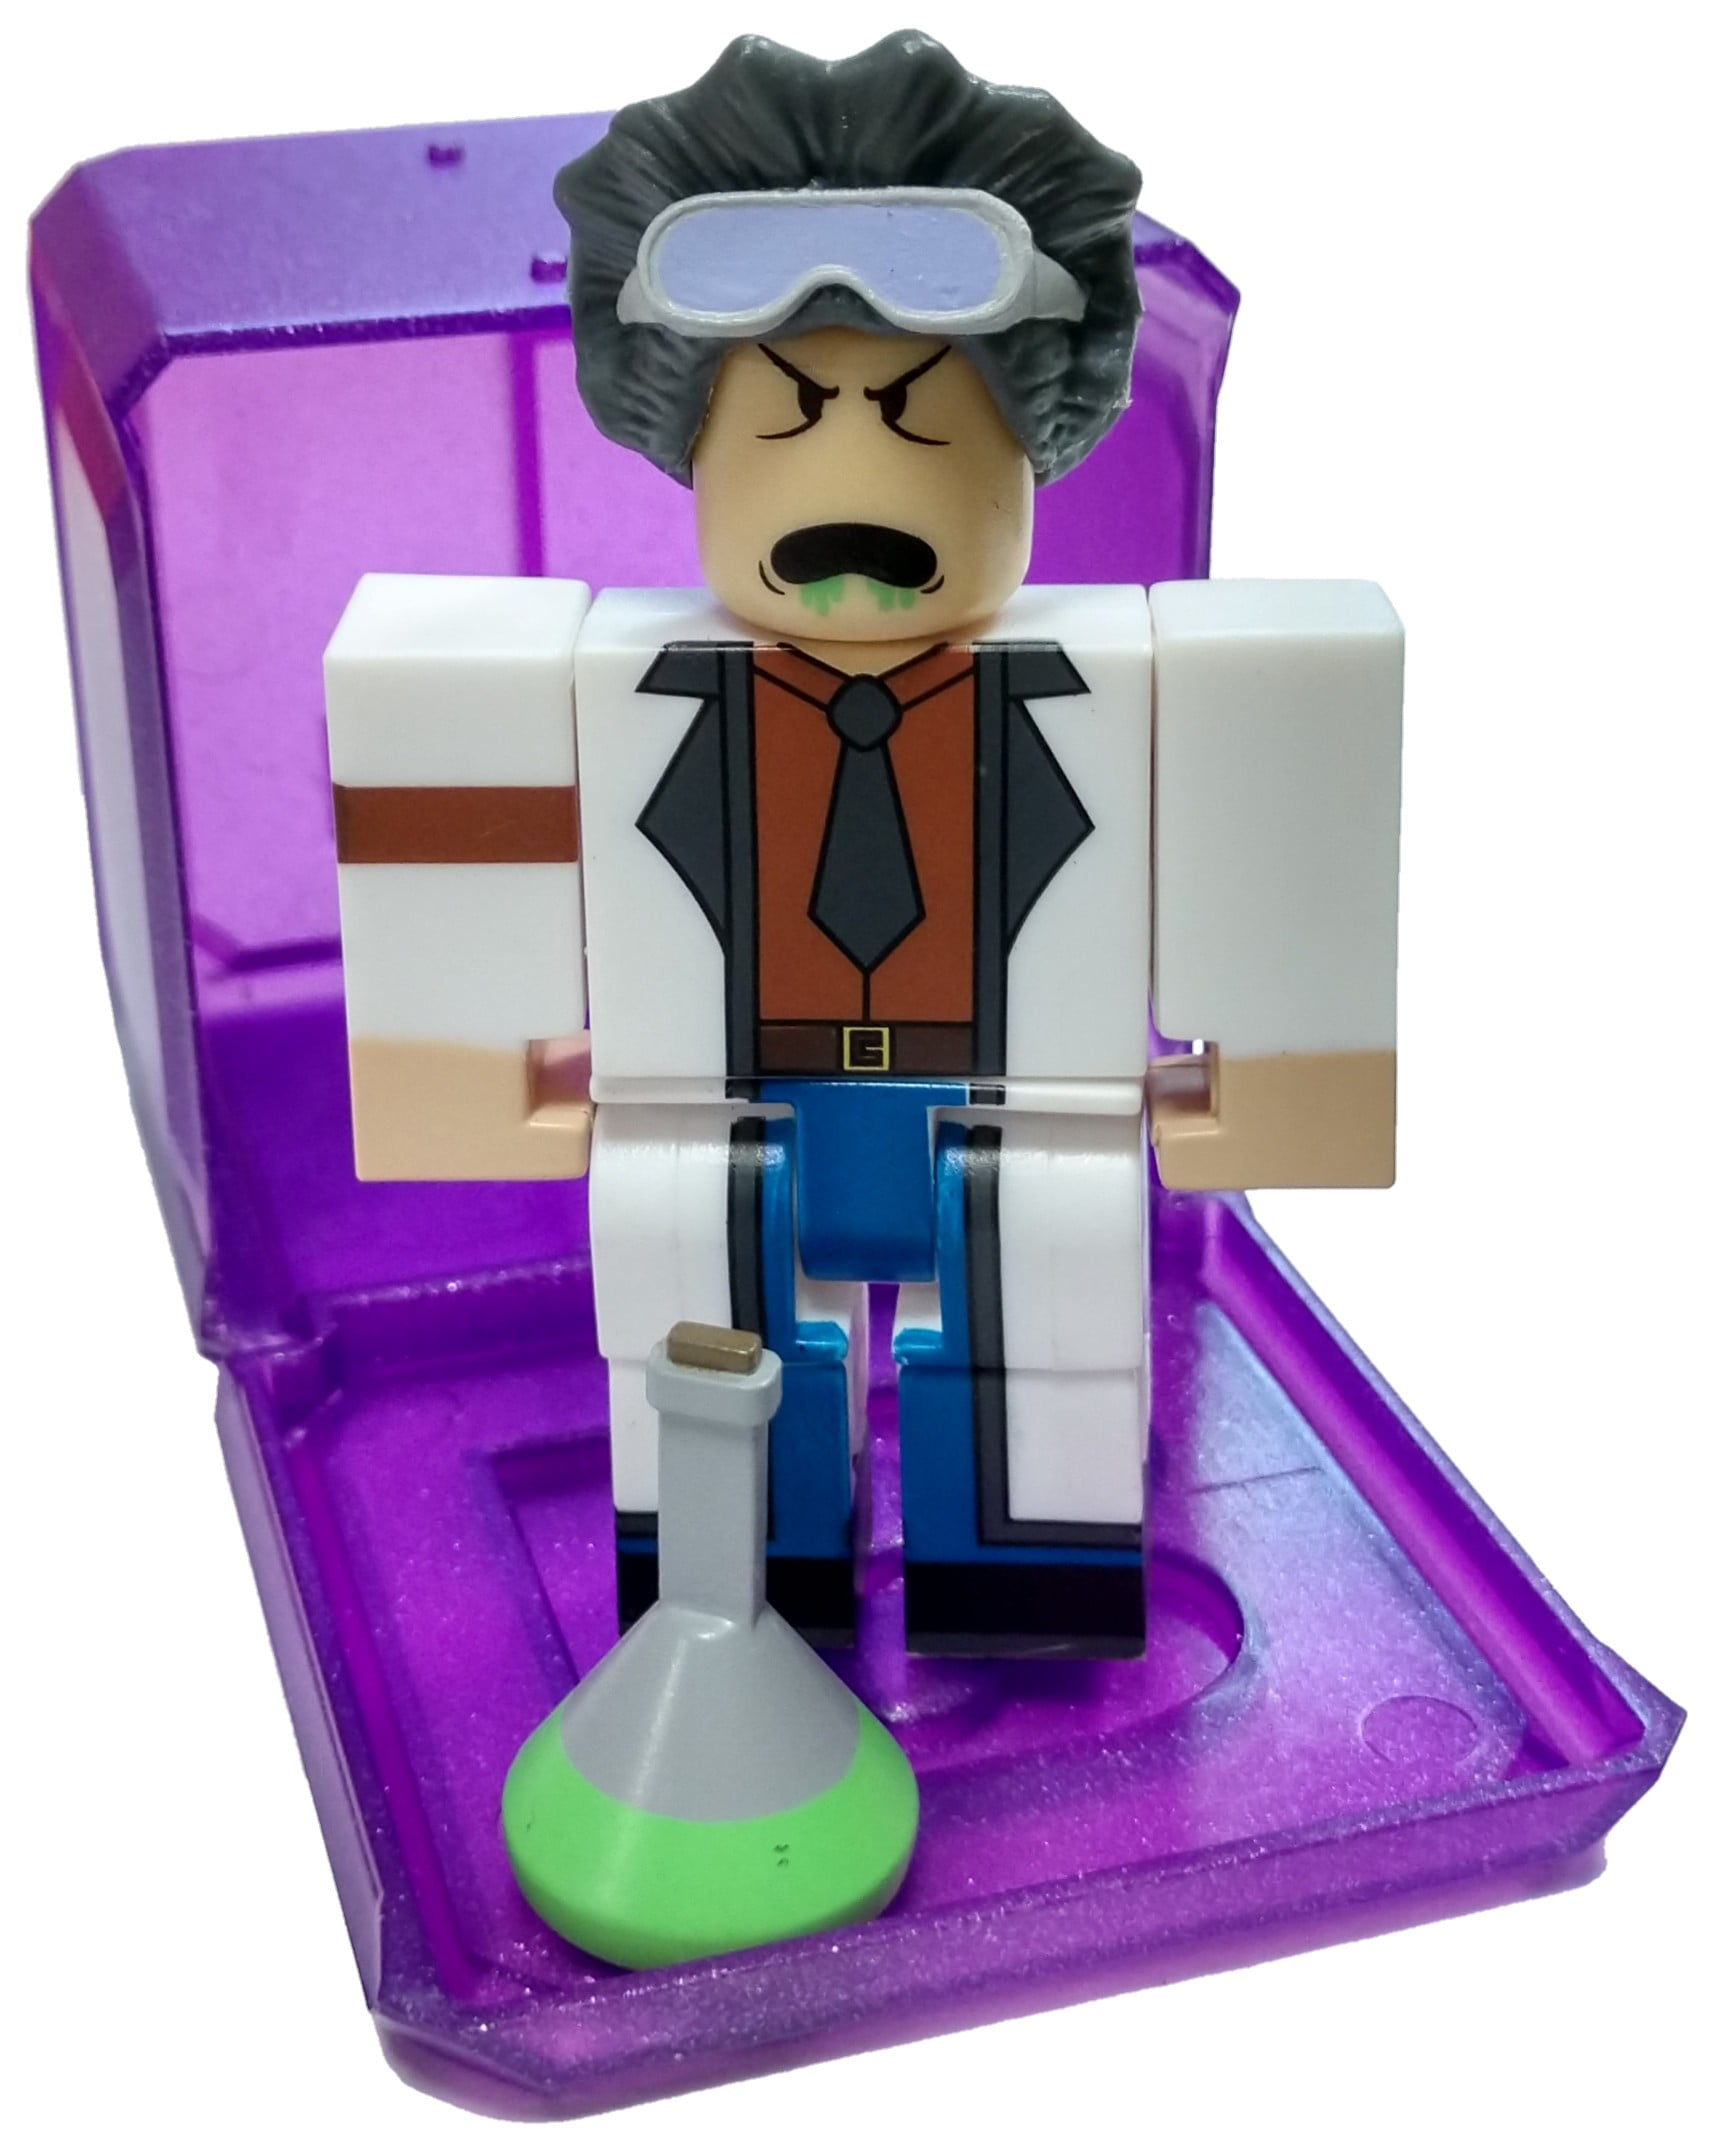 Roblox Celebrity Collection Series 3 Innovation Industries Scientist Zombie Mini Figure With Cube And Online Code No Packaging Walmart Com Walmart Com - zombie scene roblox